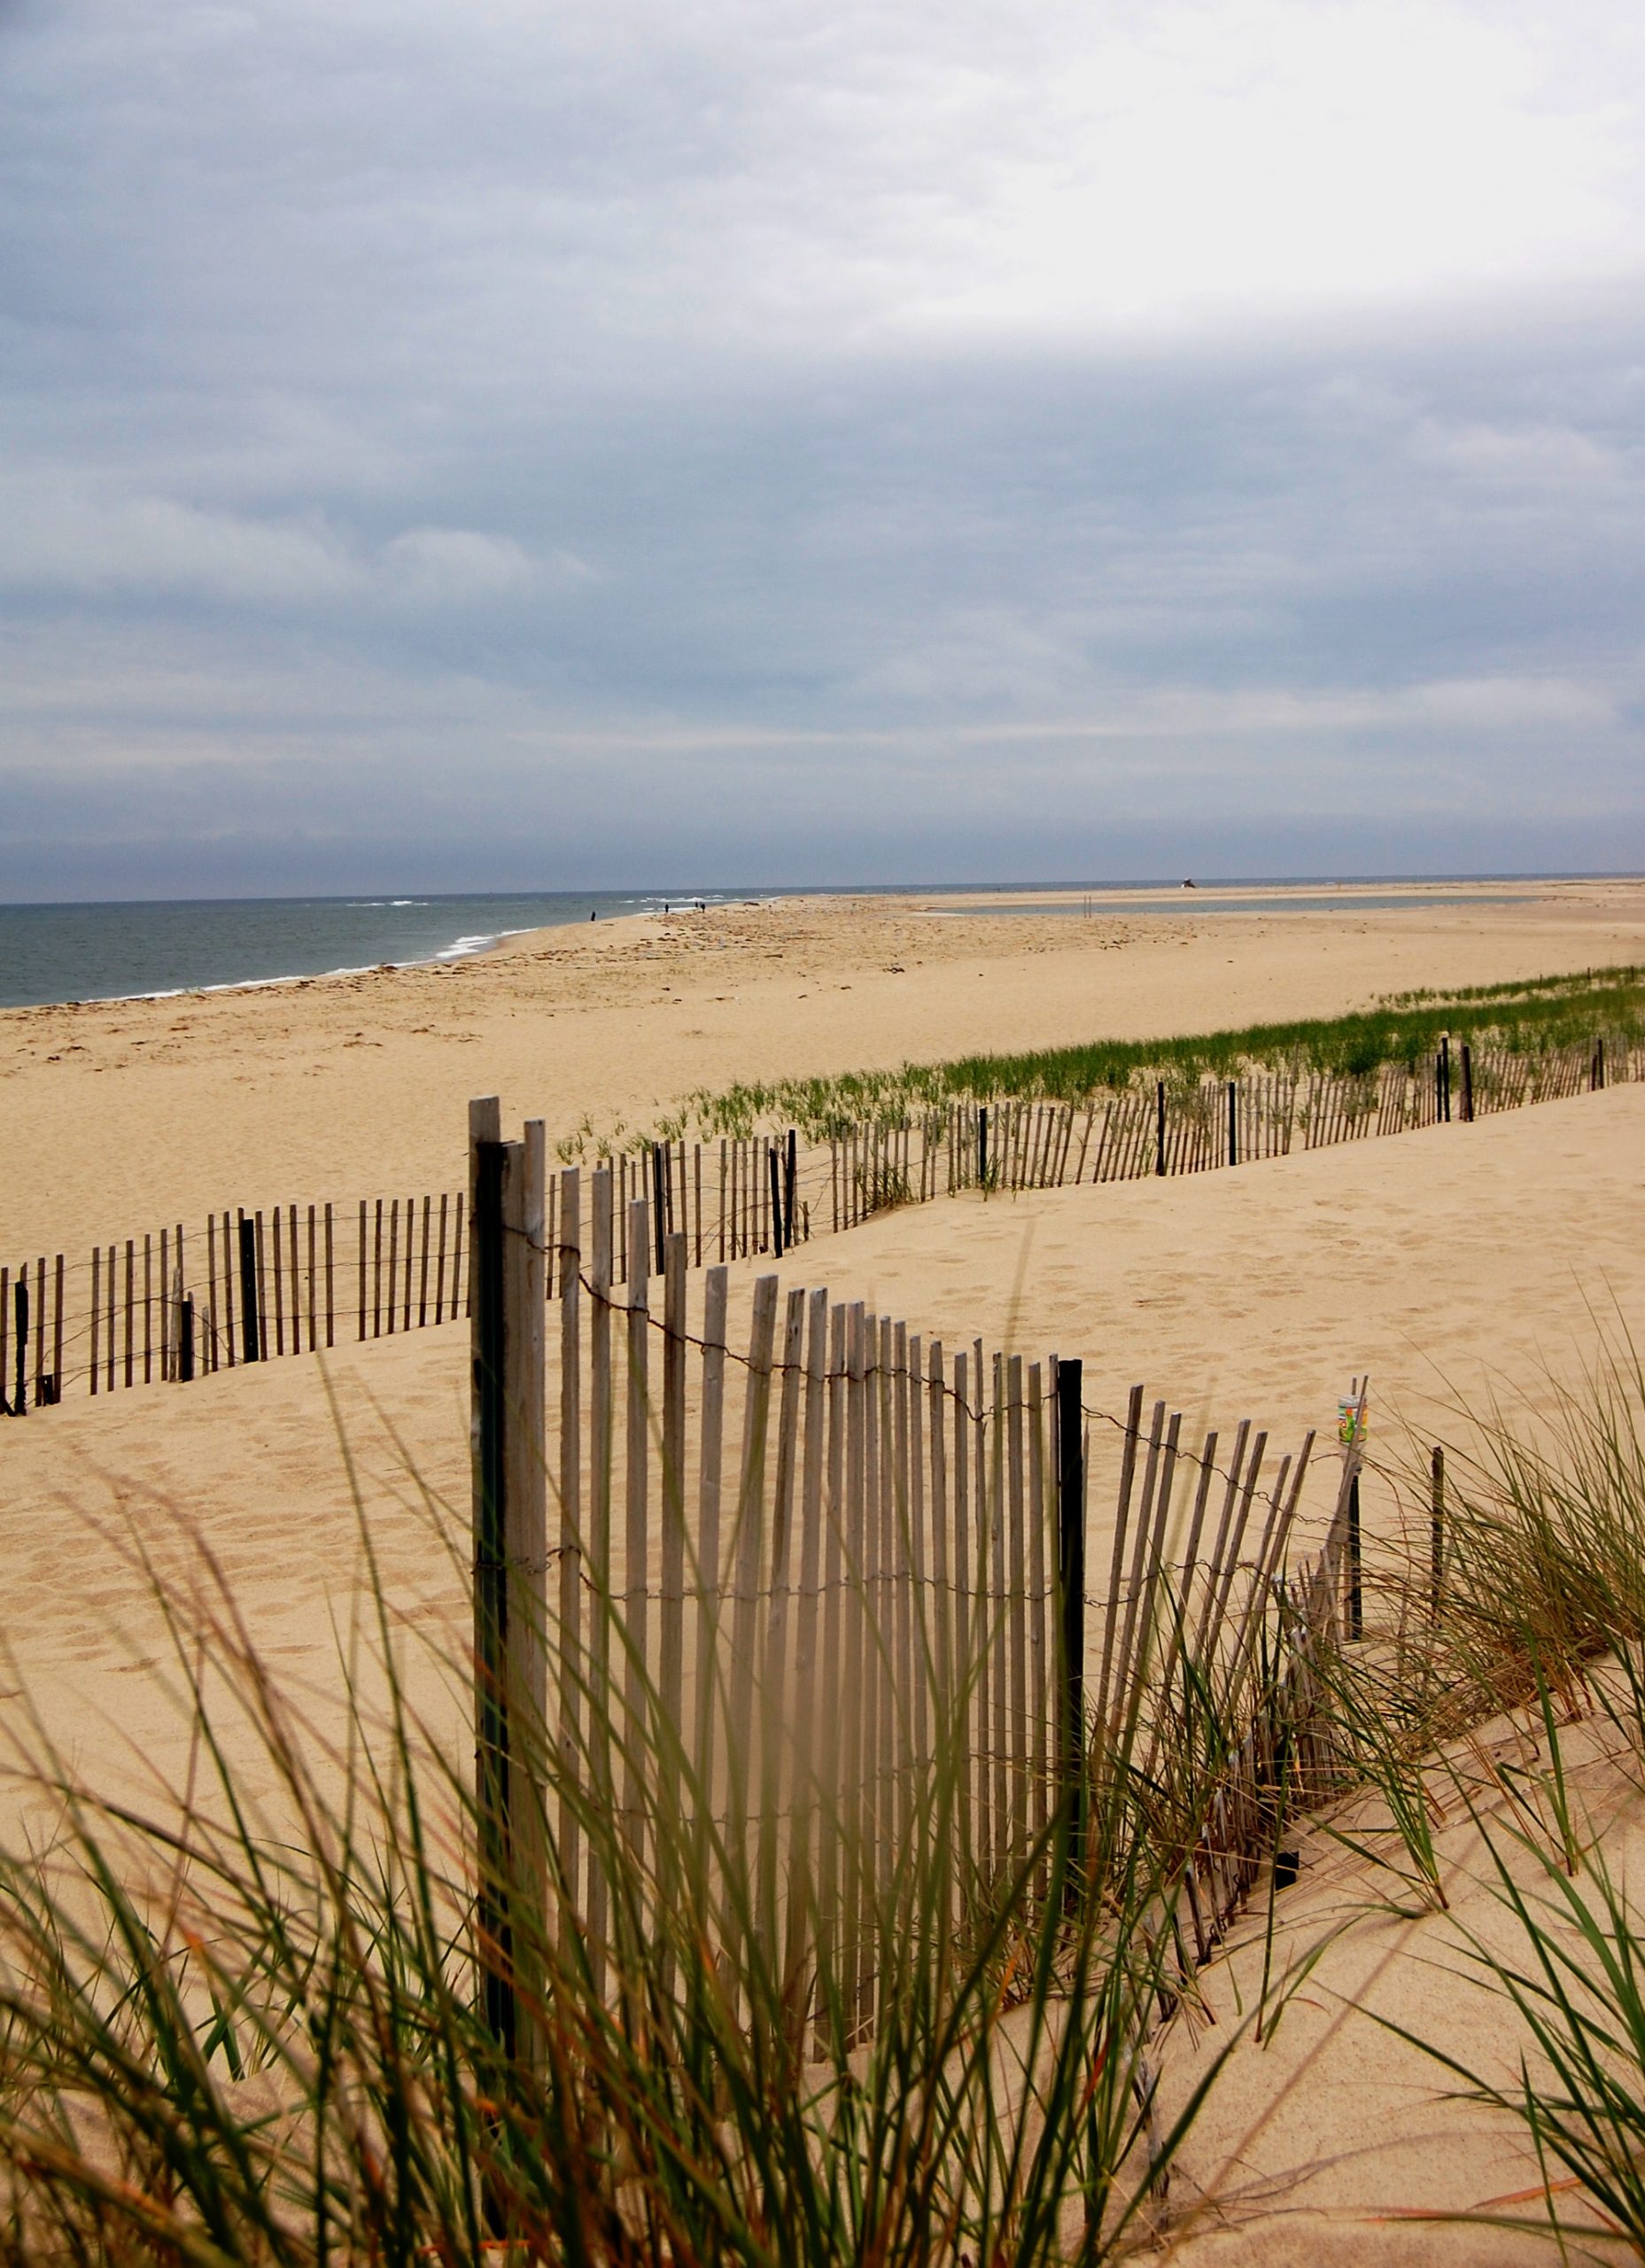 Cape Cod Beach (user submitted)